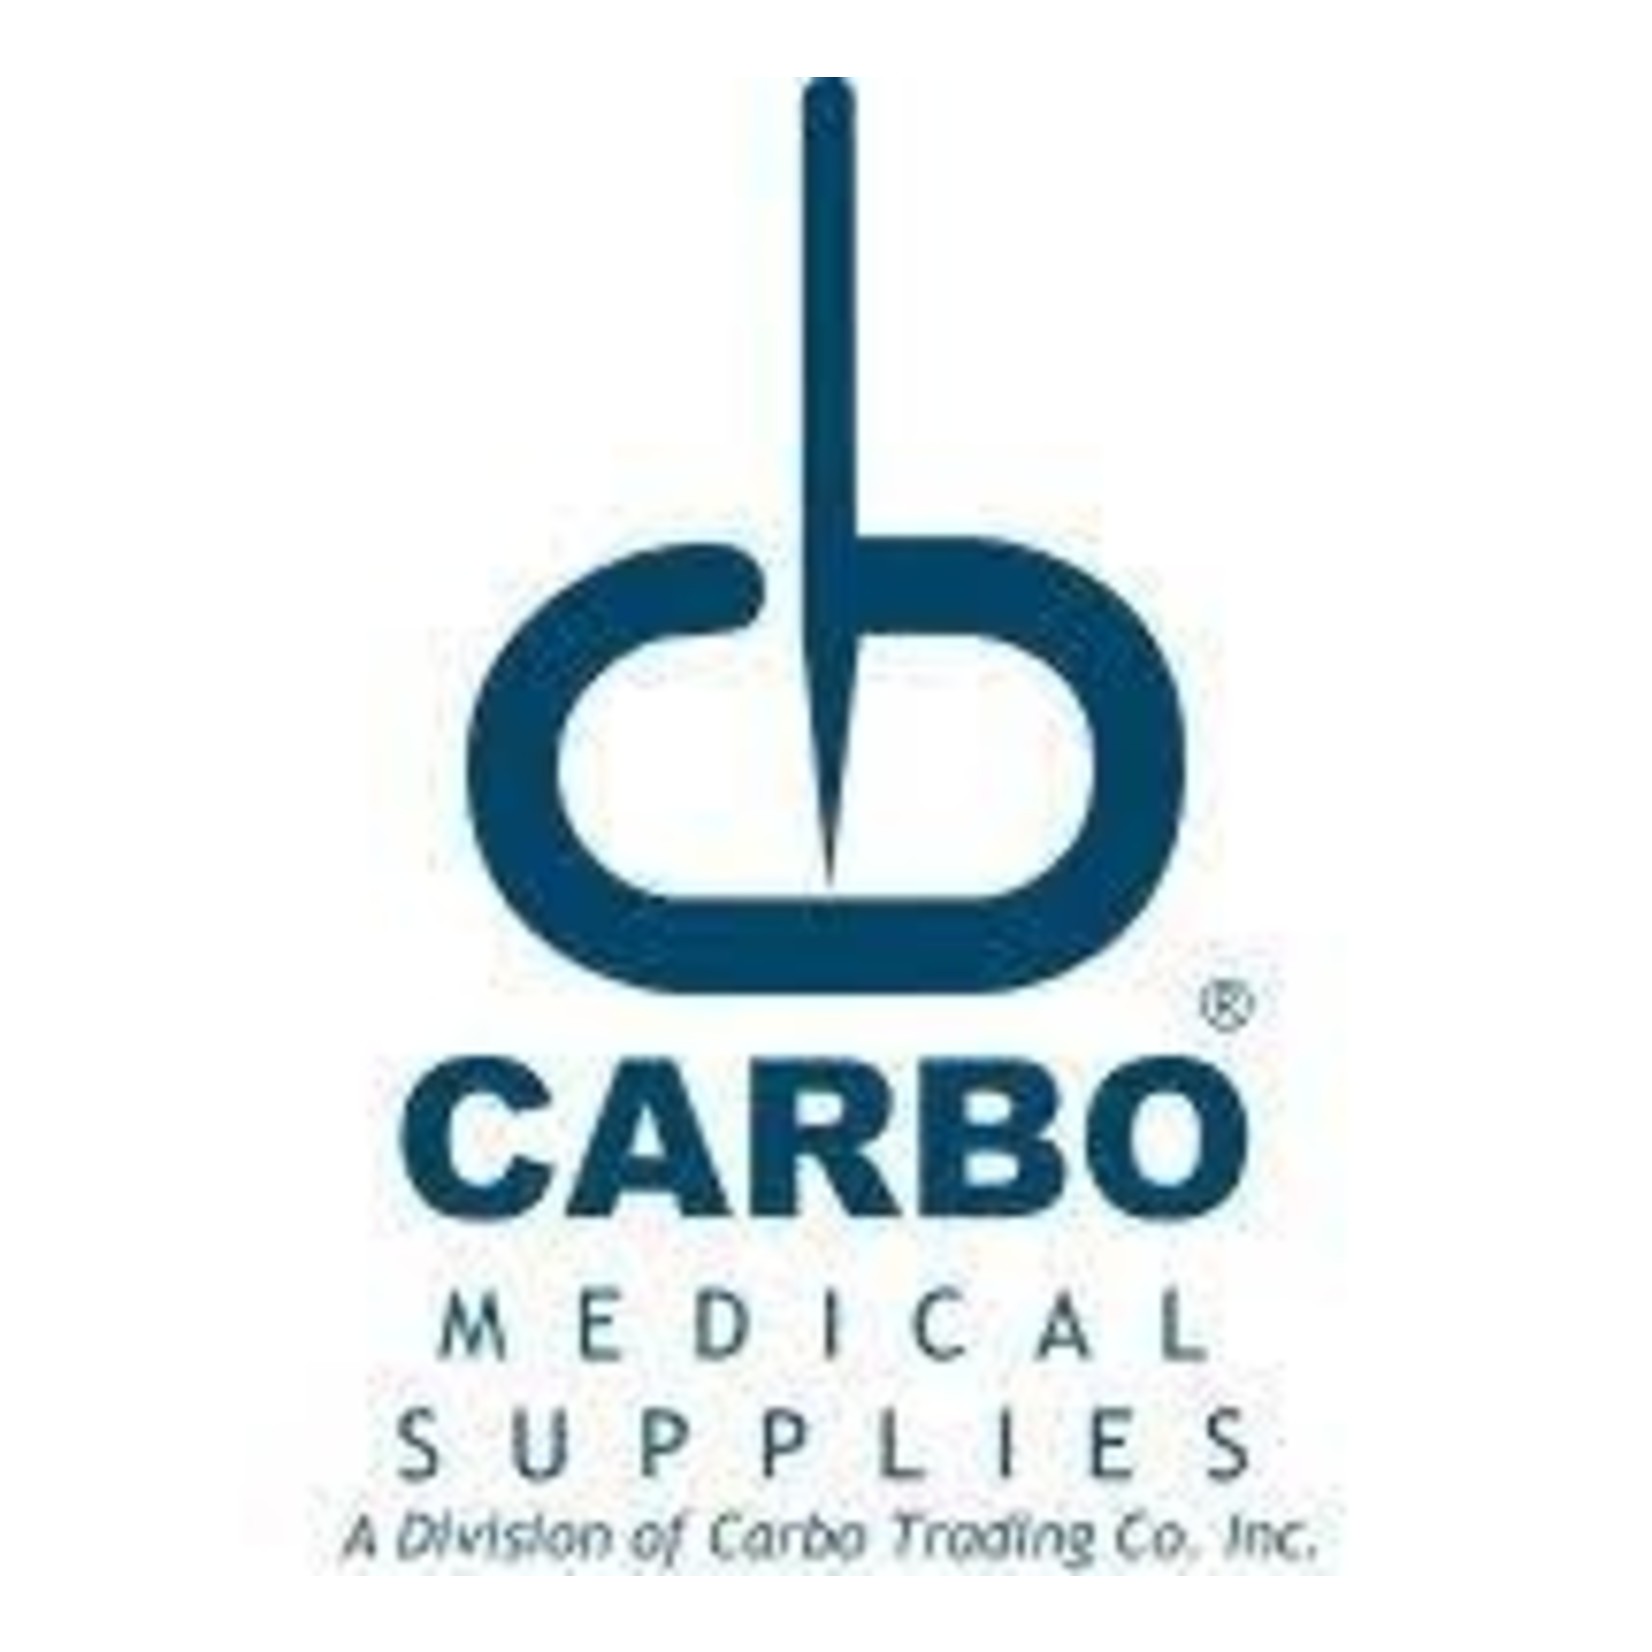 CARBO CARBO ACUPUNCTURE NEEDLE .25 x 40mm 100 PACK